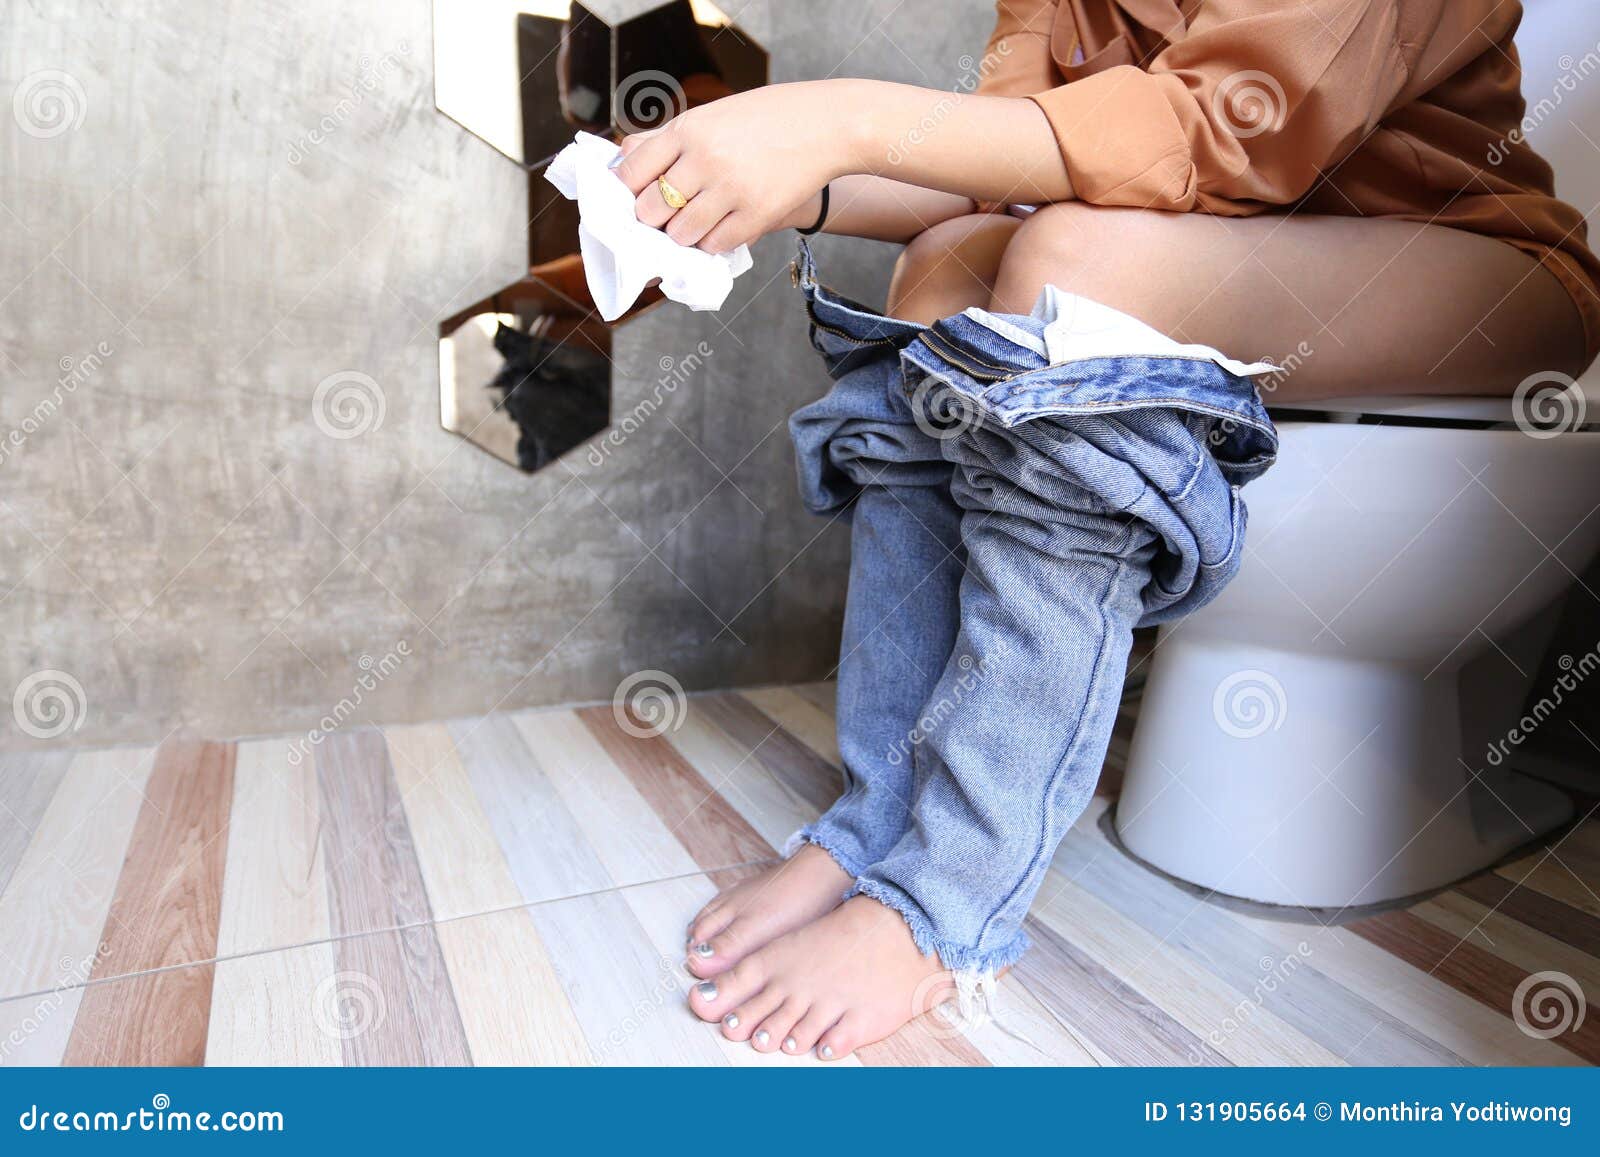 Japanese girl in jeans pissed over the toilet bowl